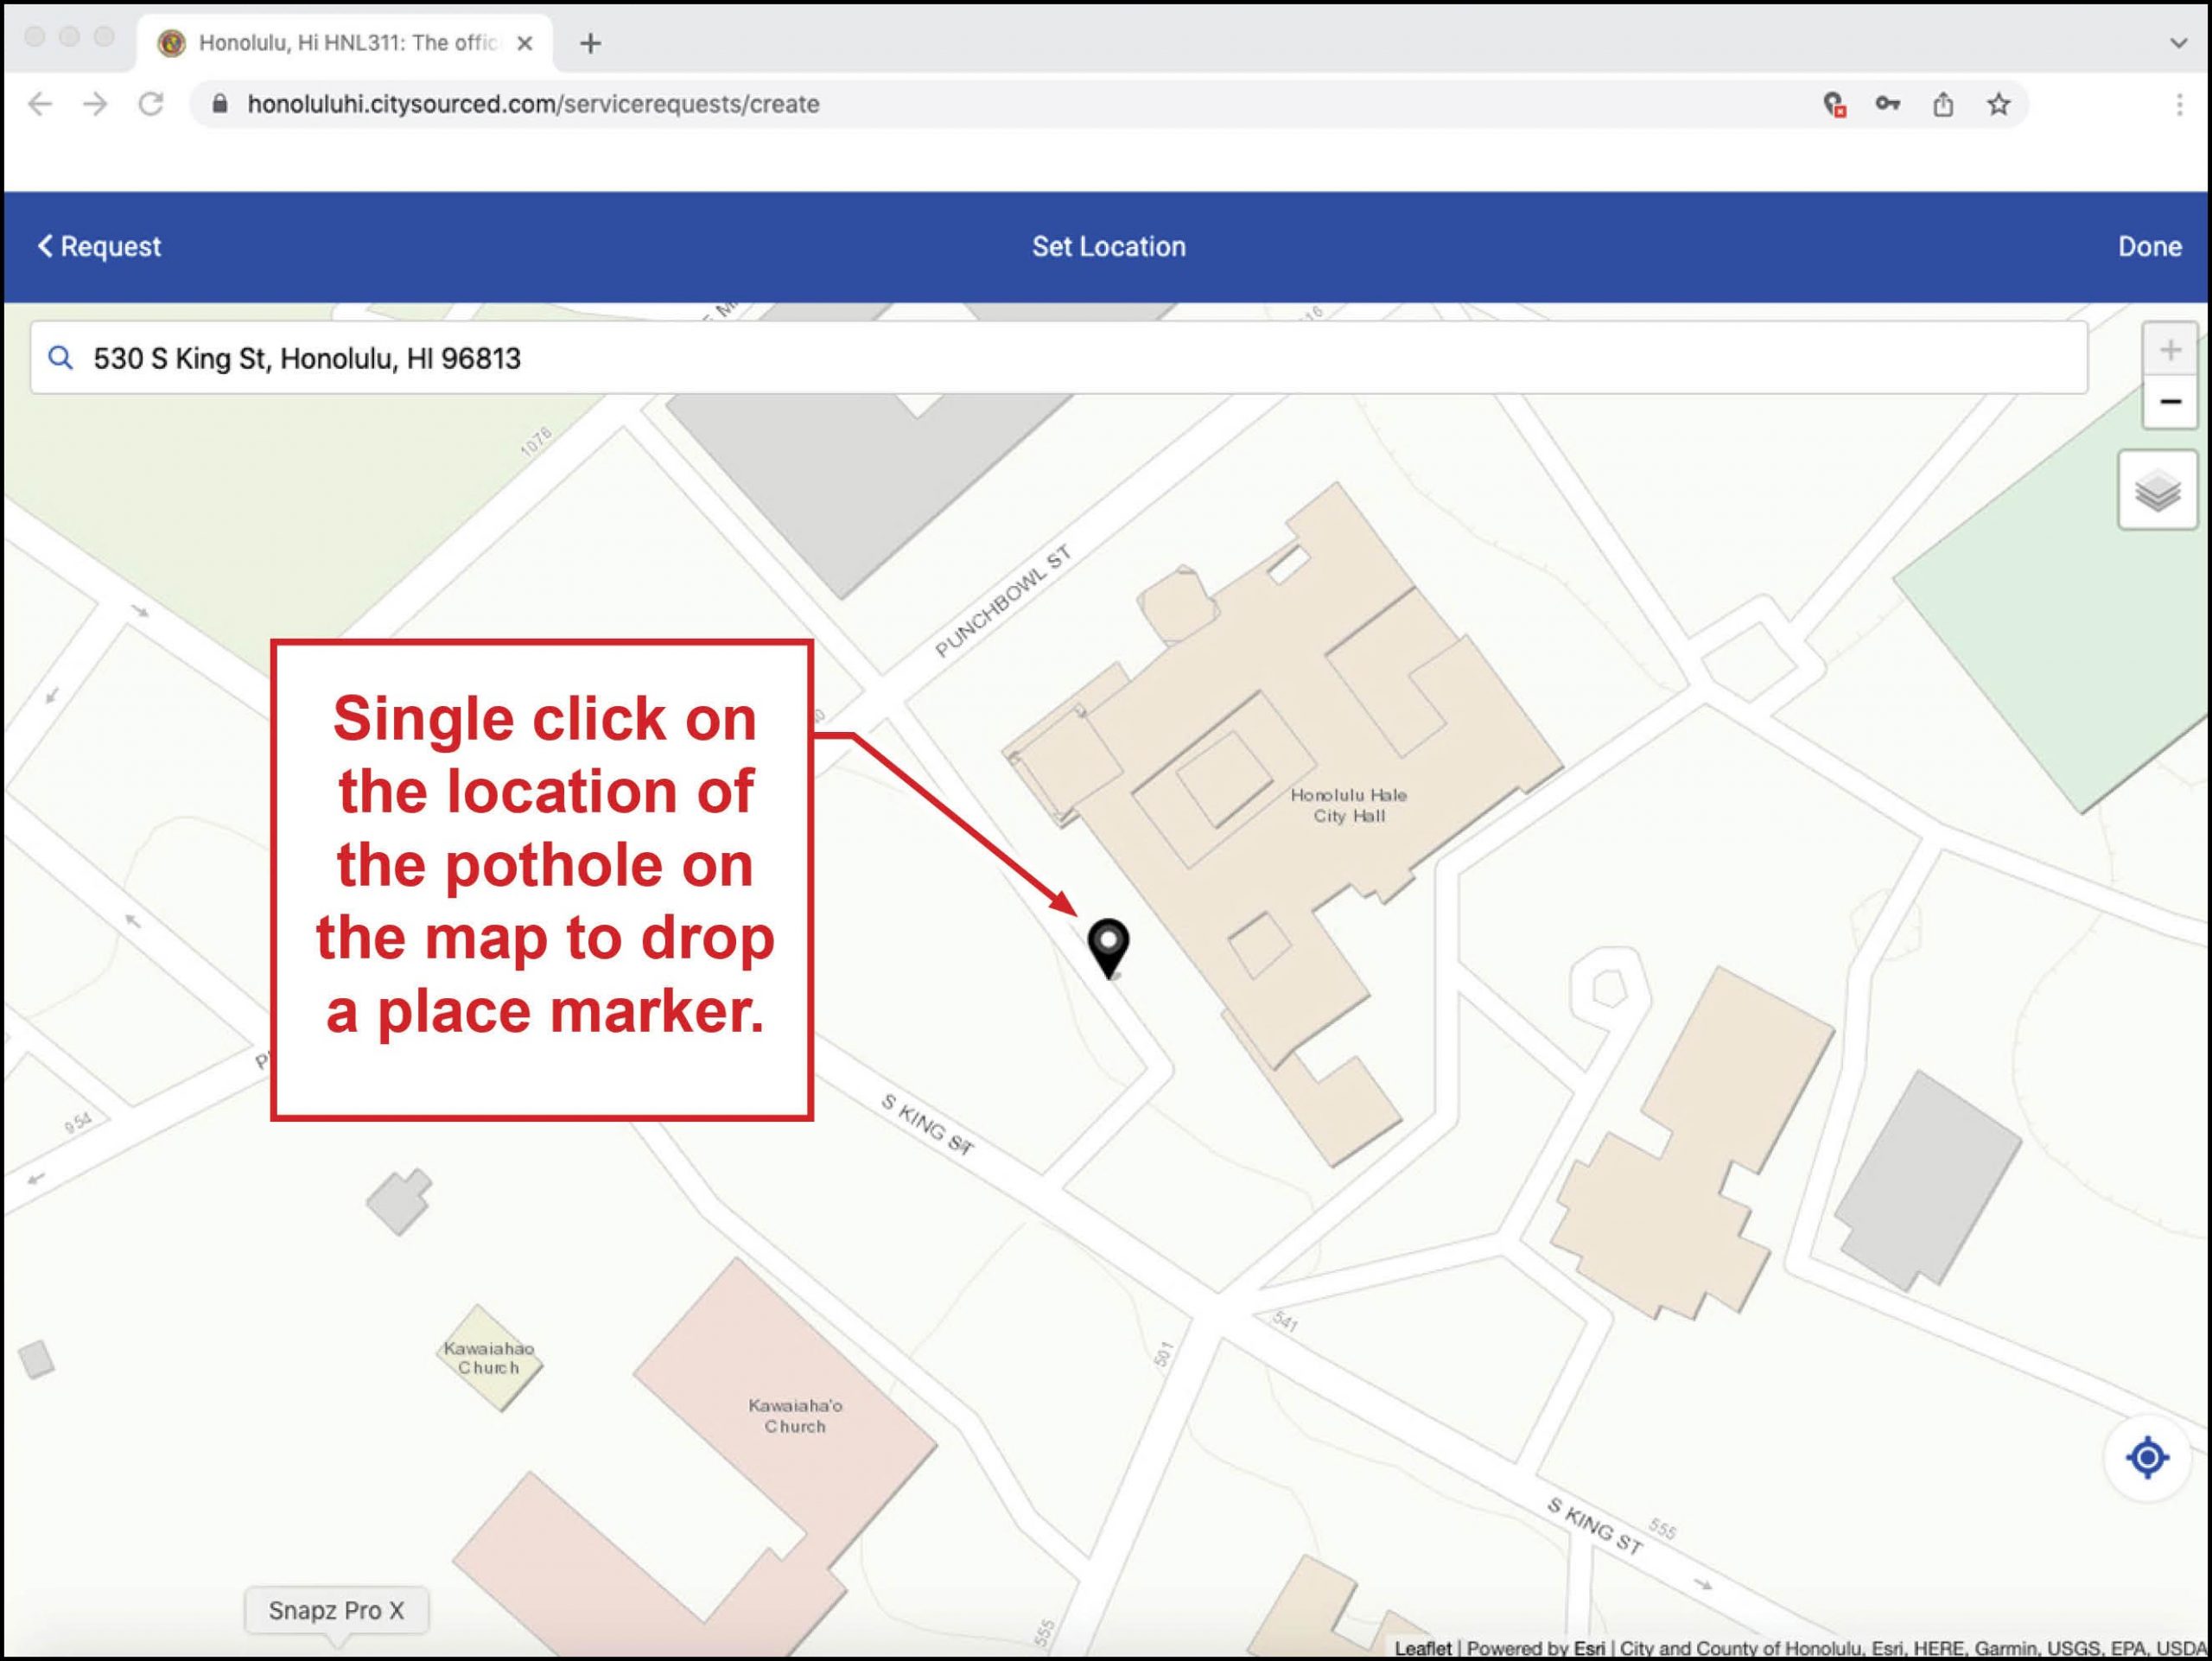 Single click on the location of the pothole on the map to drop a place marker.